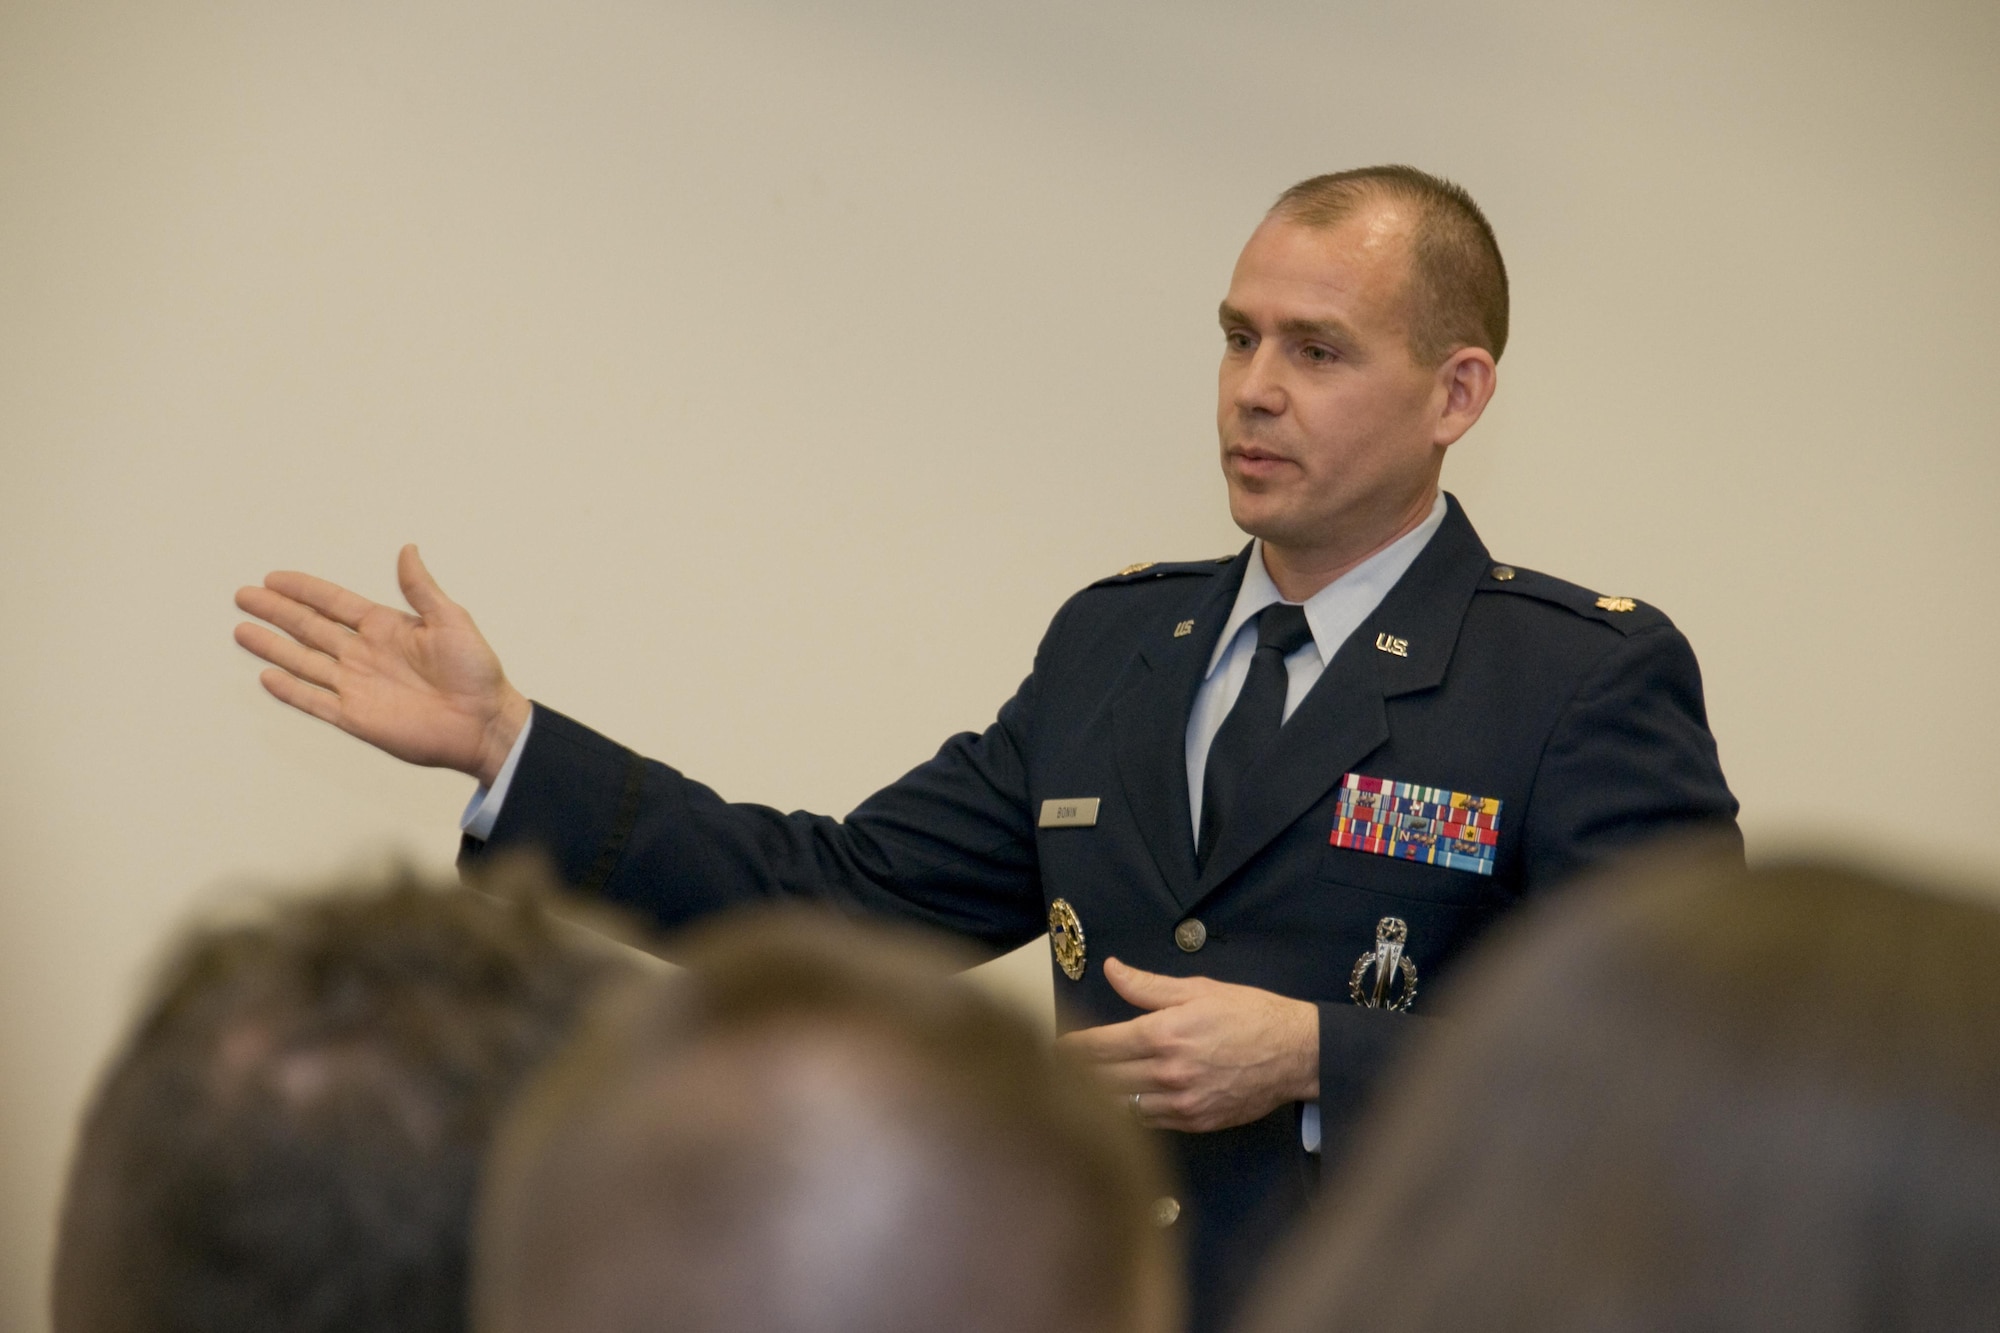 Maj. Stephen Bonin, a senior emergency actions officer with the National Military Command Center, briefs policymakers on the nuclear triad system during an Air Force 101 session at the Rayburn House Office Building in Washington, D.C., Jan. 11, 2015. The bi-monthly sessions educate policymakers on Air Force matters to help them make informed decisions. (U.S. Air Force photo/Sean Kimmons)